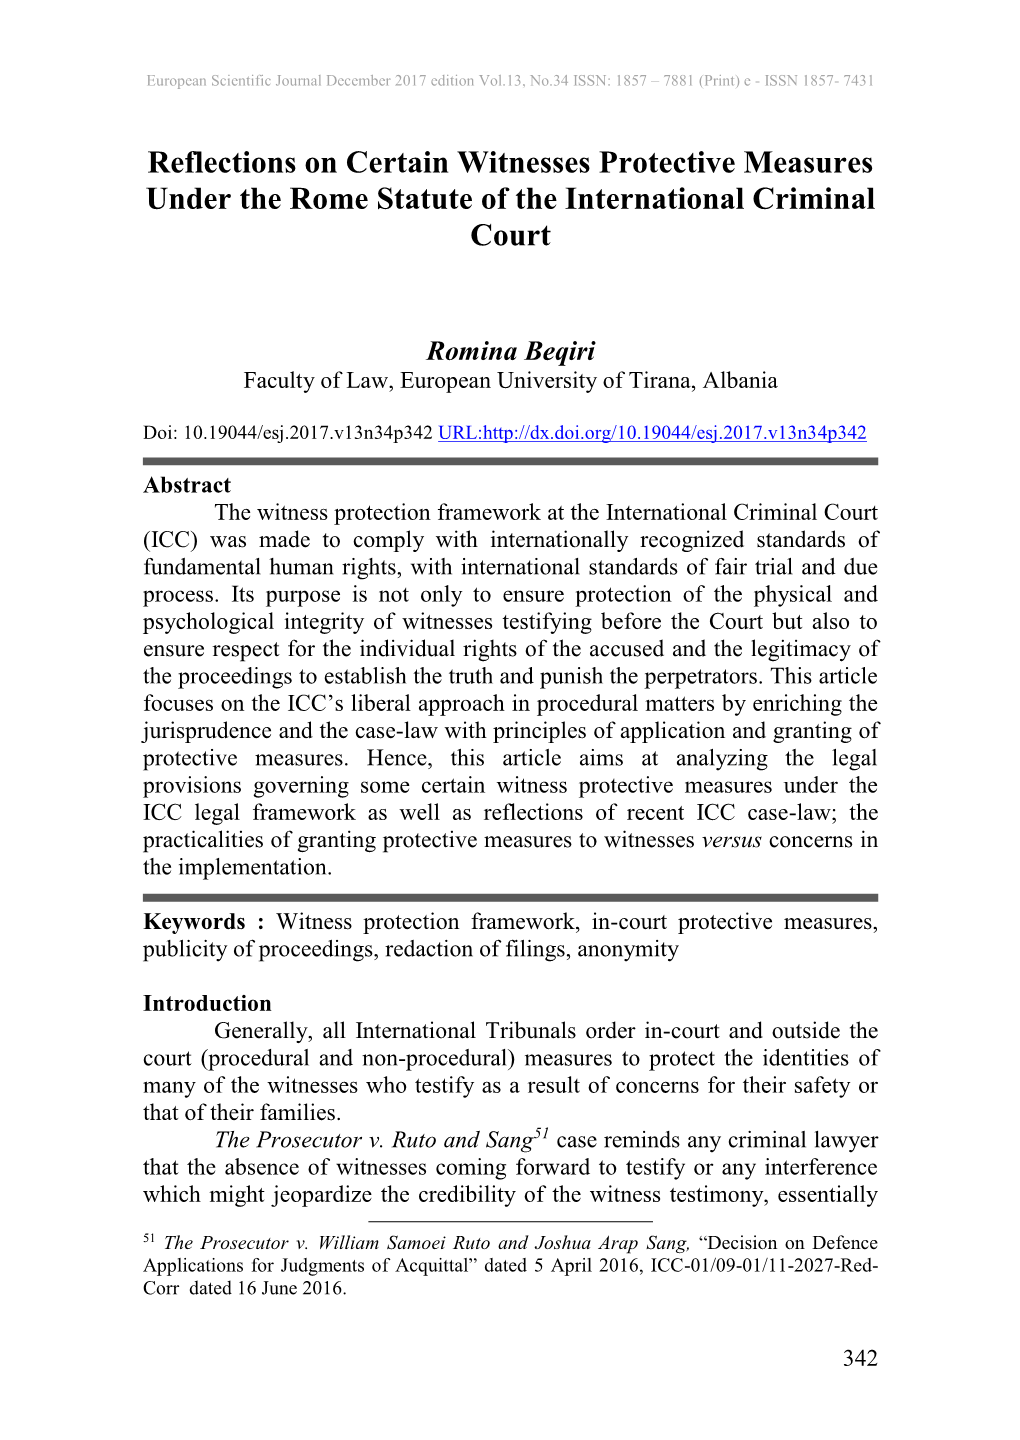 Reflections on Certain Witnesses Protective Measures Under the Rome Statute of the International Criminal Court